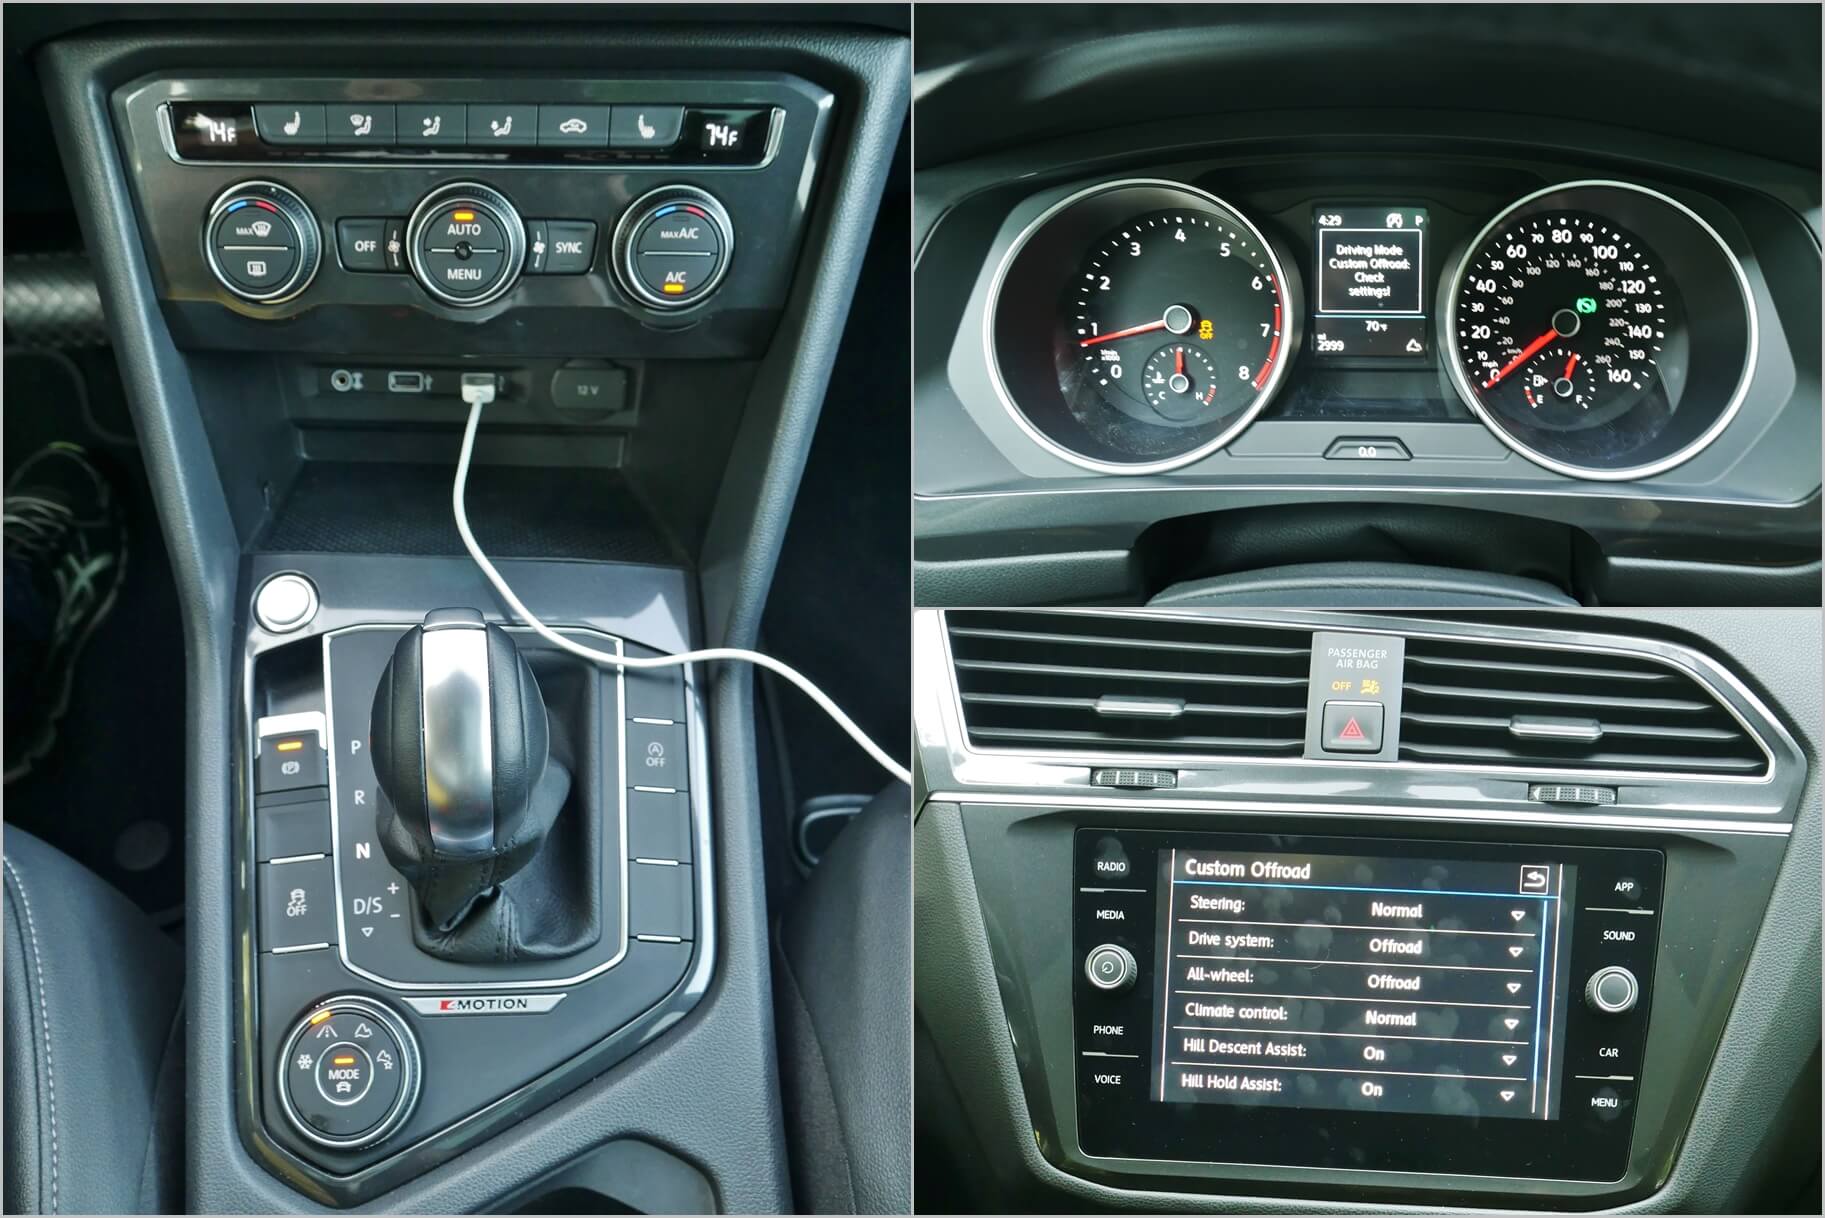 2018 Volkswagen Tiguan SE AWD: Center console dial controlled Drive Modes includes Offroad "customization"